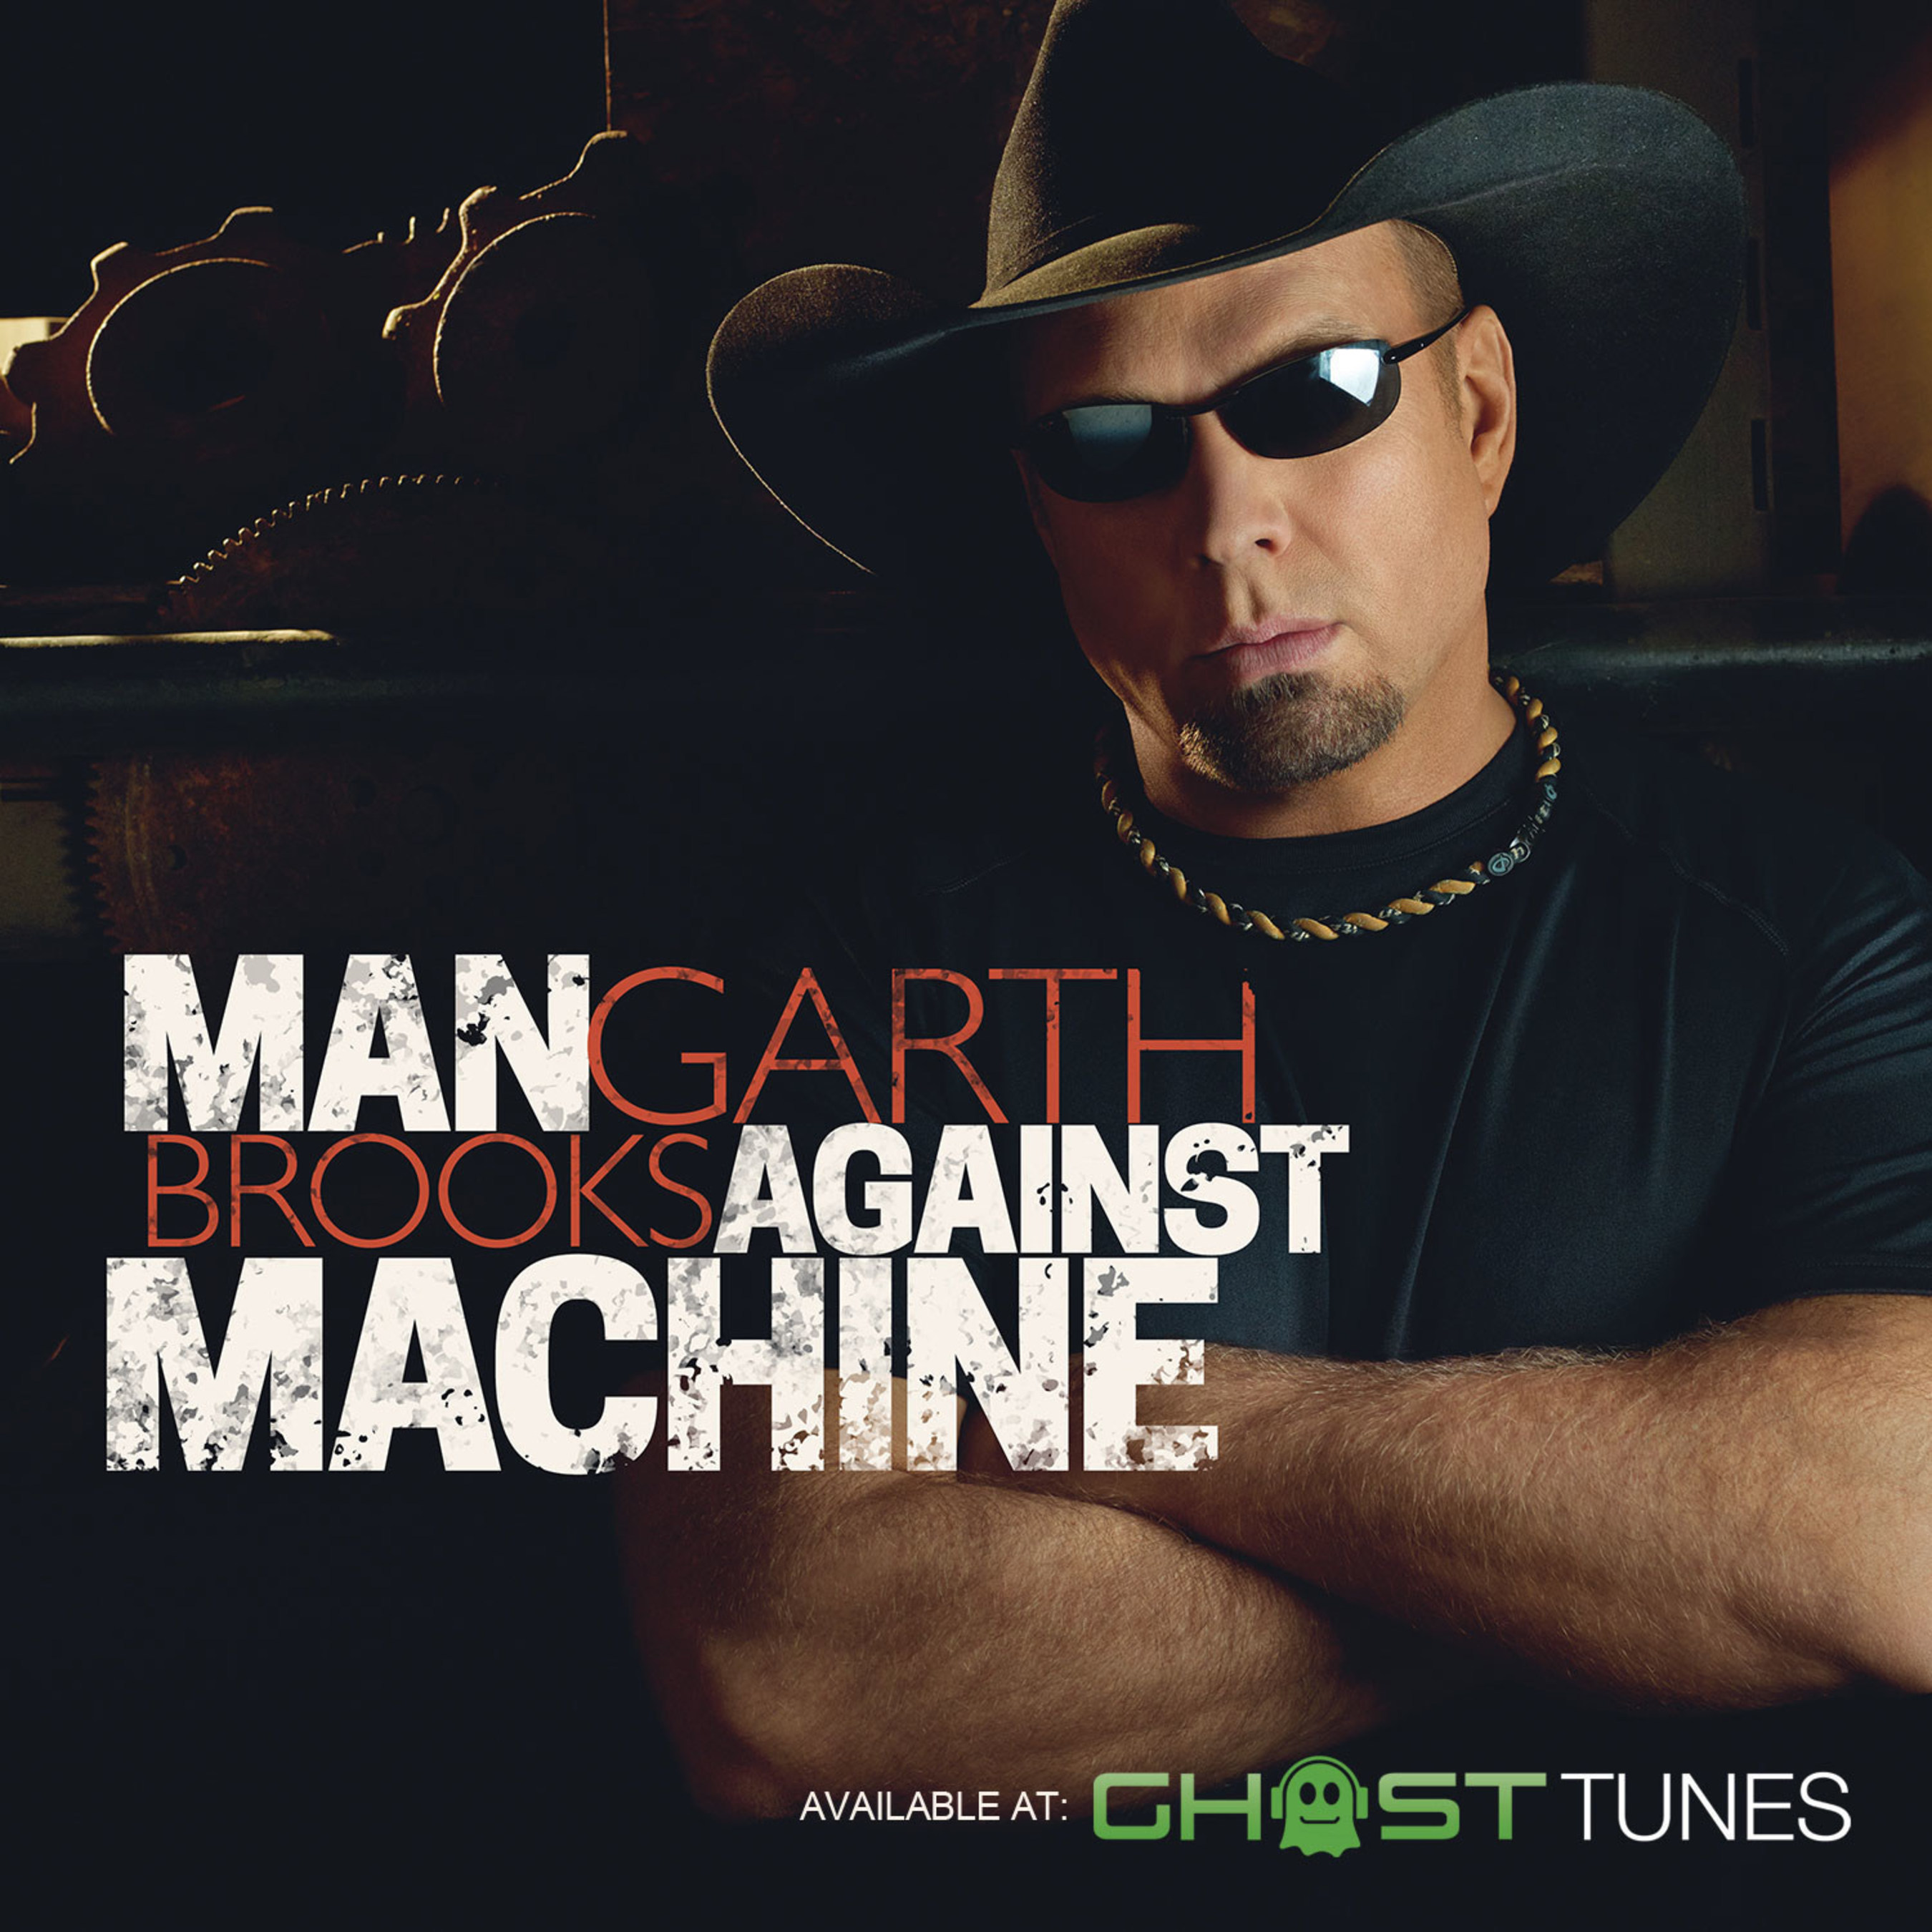 The 13-year wait ends tonight at midnight for Garth Brooks' fans as the artist's new album - Man Against Machine - arrives on GhostTunes, a site created by the award-winning Brooks to provide a new way for artists of all genres to entertain and engage their fans. Fans heard an exclusive "first listen" of the new album on GhostTunes on Halloween, and tonight can visit GhostTunes to buy the full album at a special low price of $12.99 for the digital album.